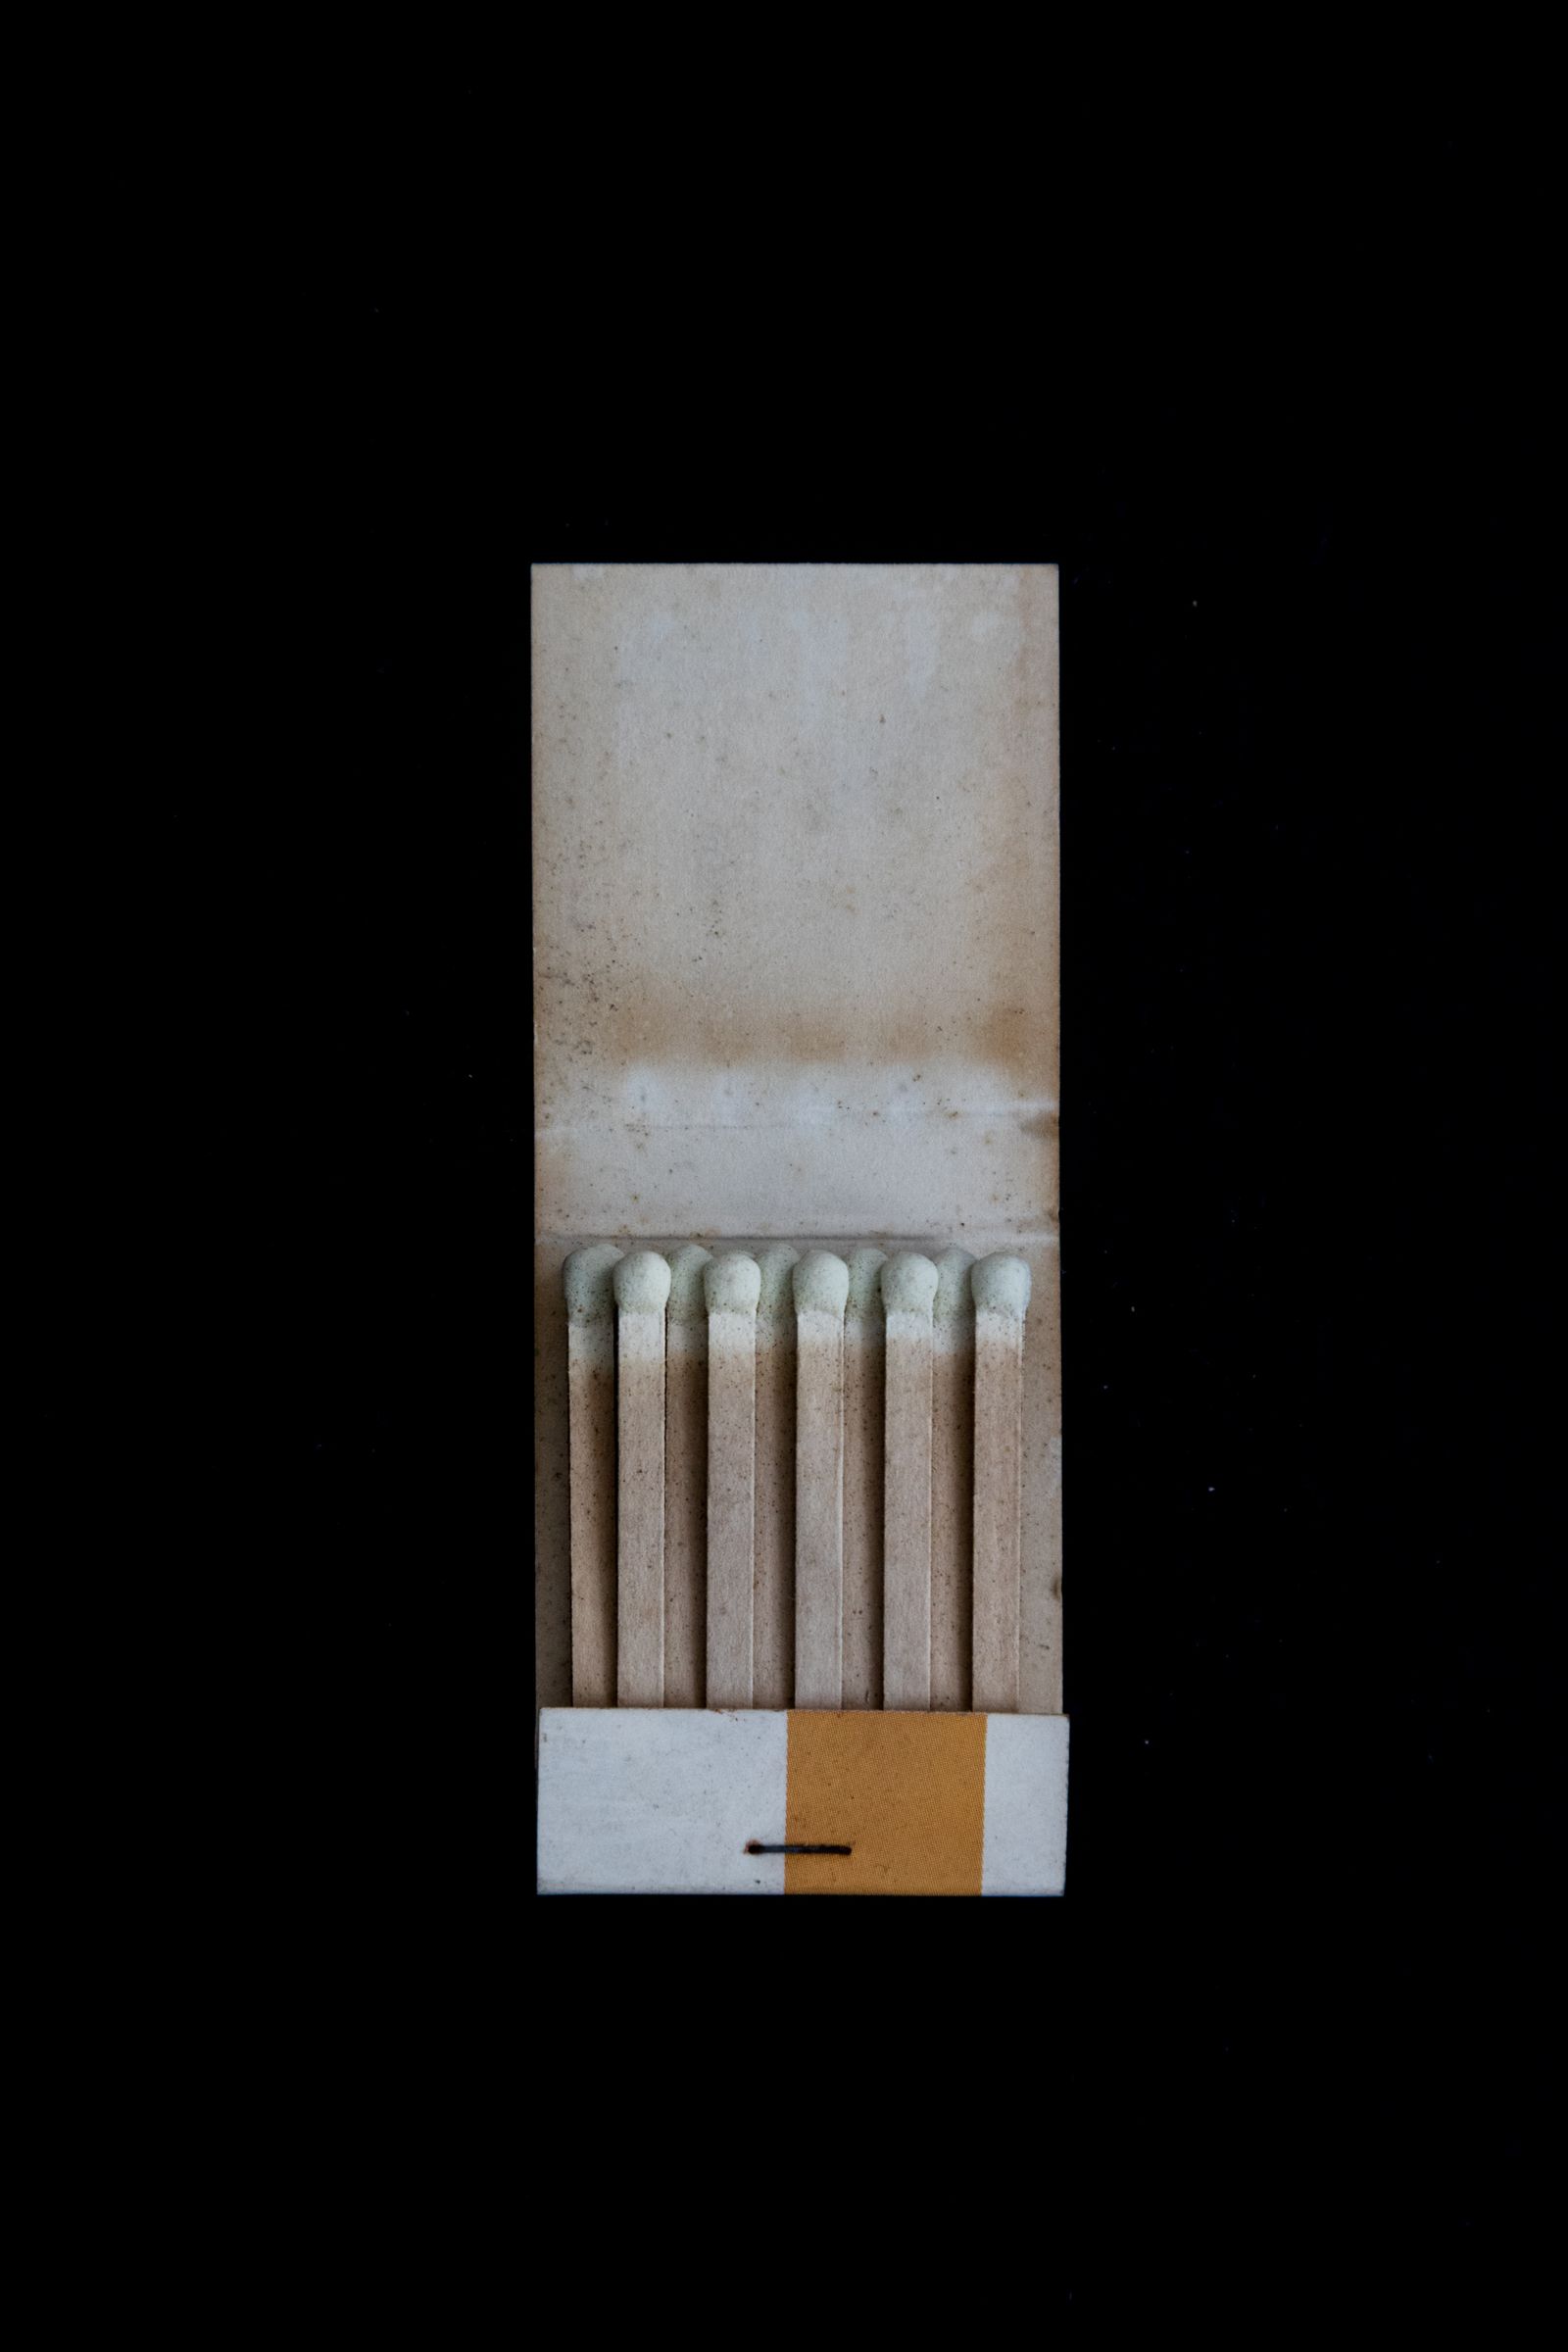 © Sofia Verzbolovskis - Image from the The Matchbook Years photography project